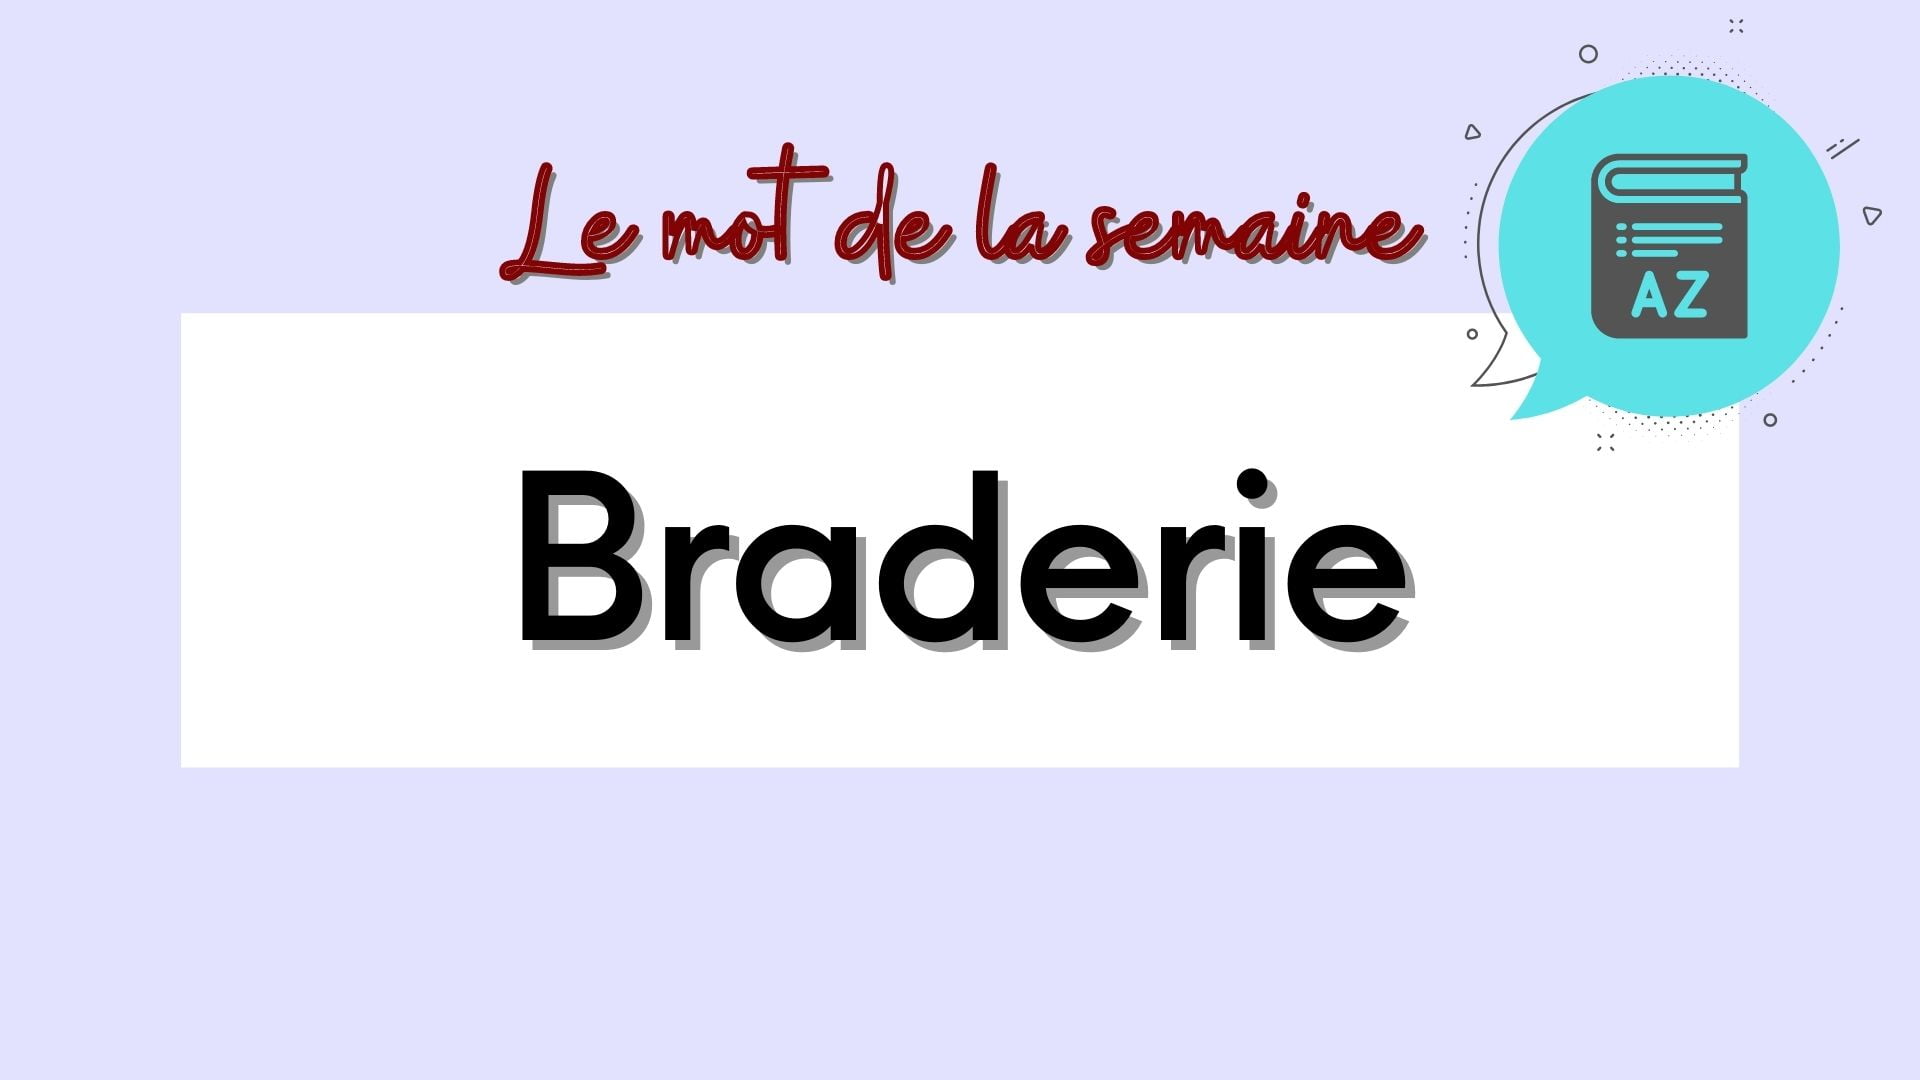 Braderie in French